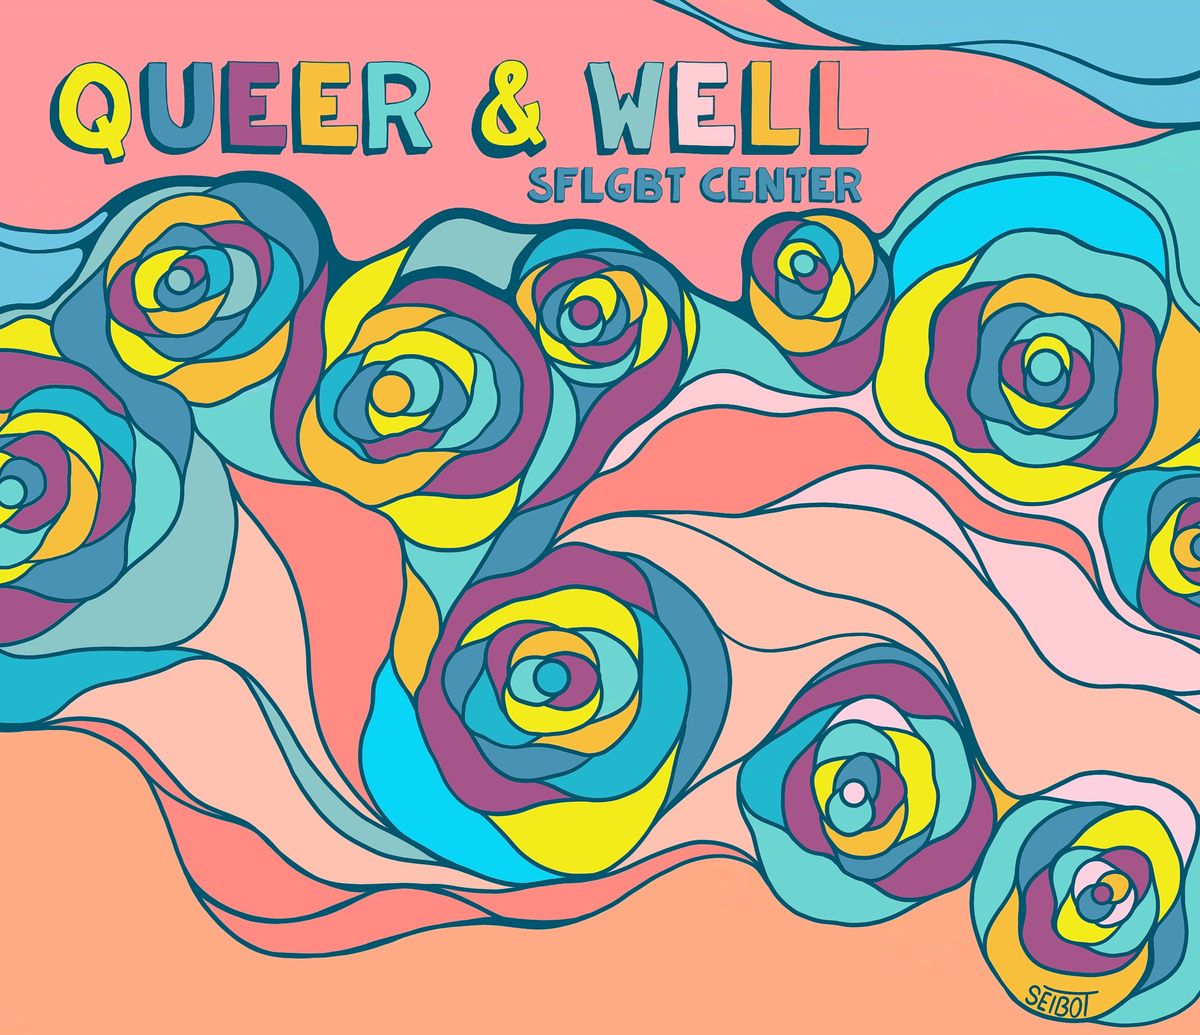 Queer & Well : PRIDE YOGA